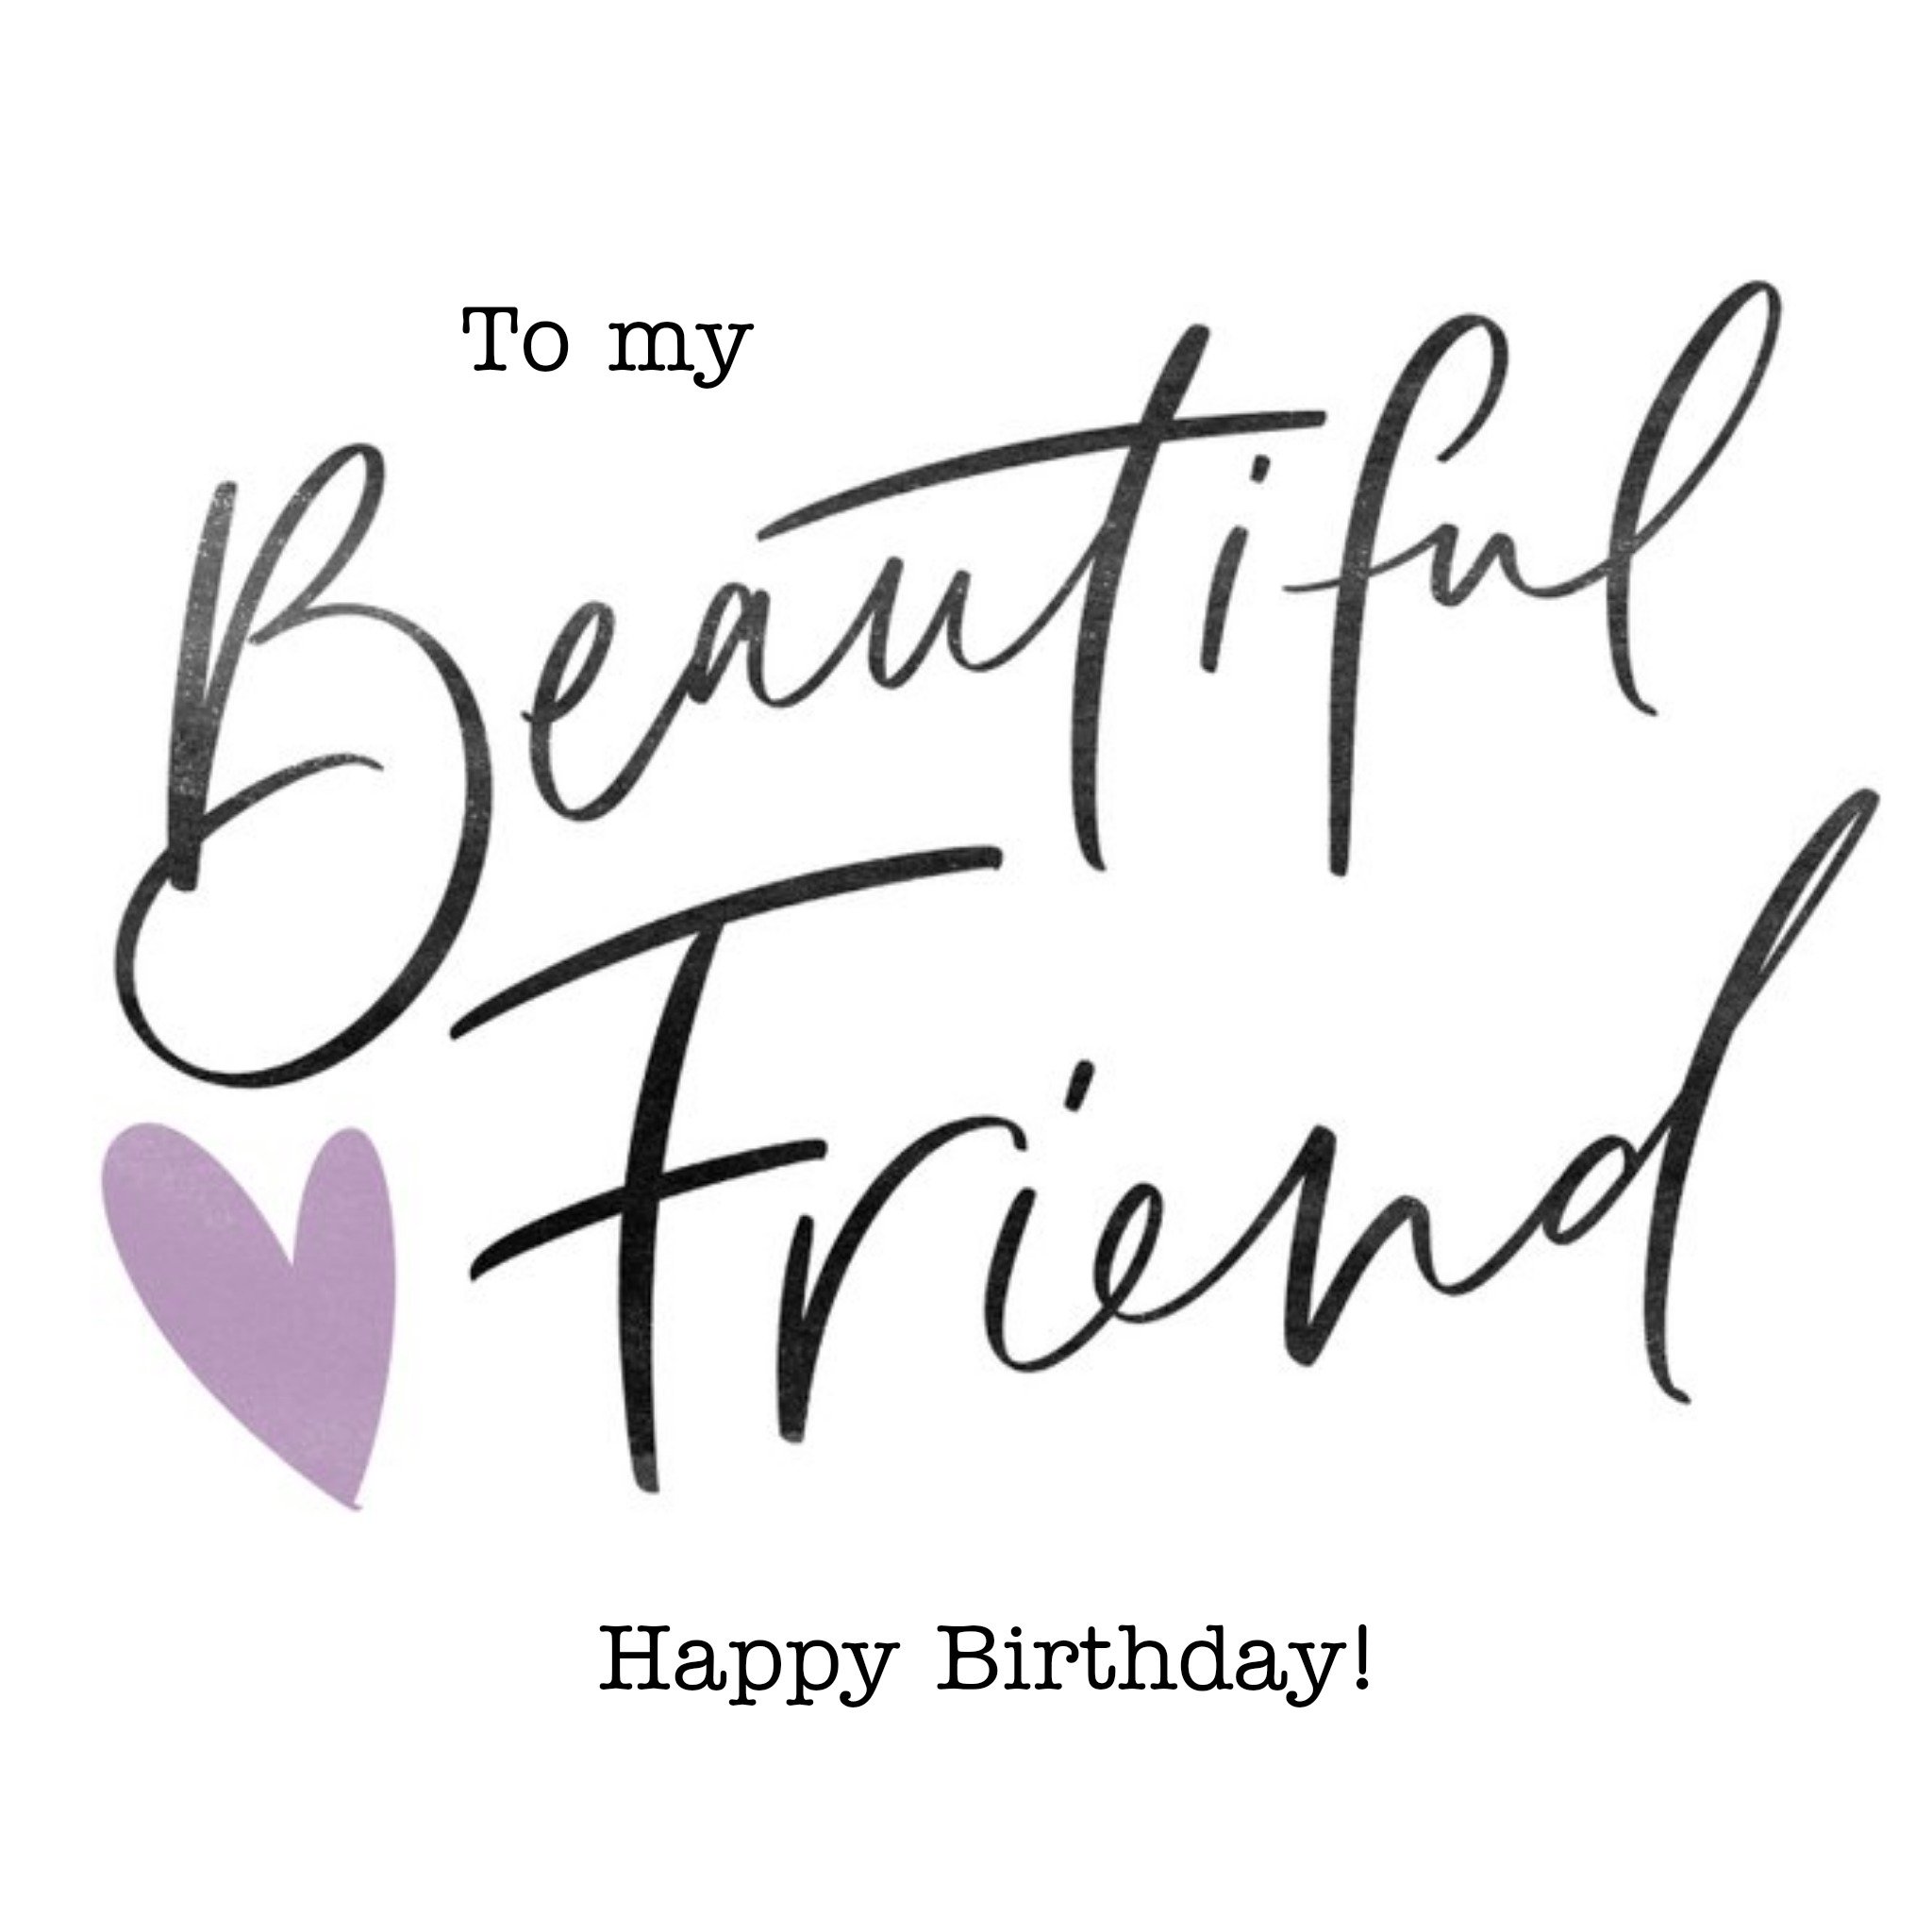 Moonpig To My Beautiful Friend Calligraphy Birthday Card, Large